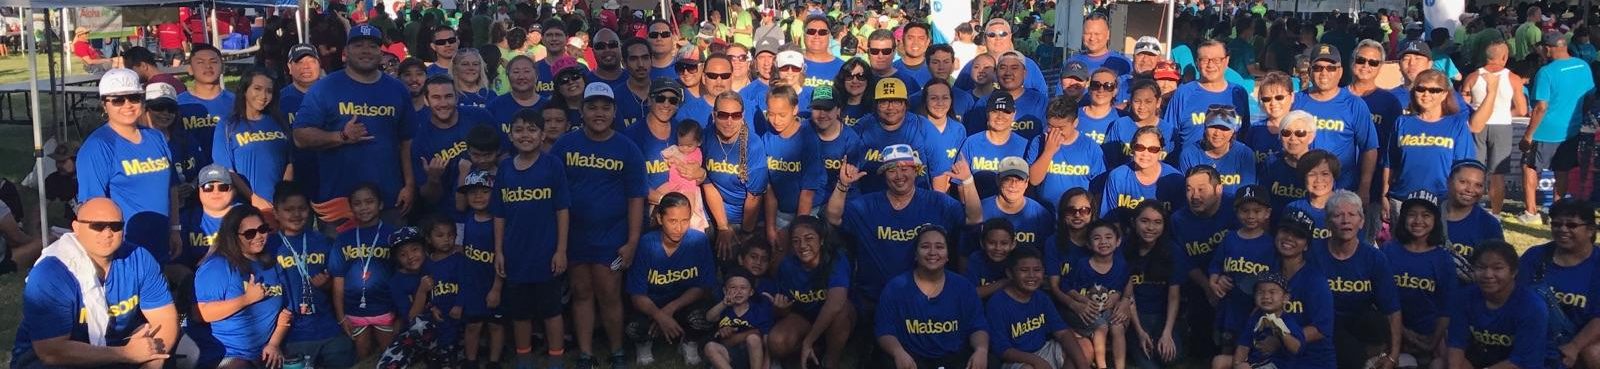 Matson participants at 2017 Heart and Stroke Walk in Honolulu